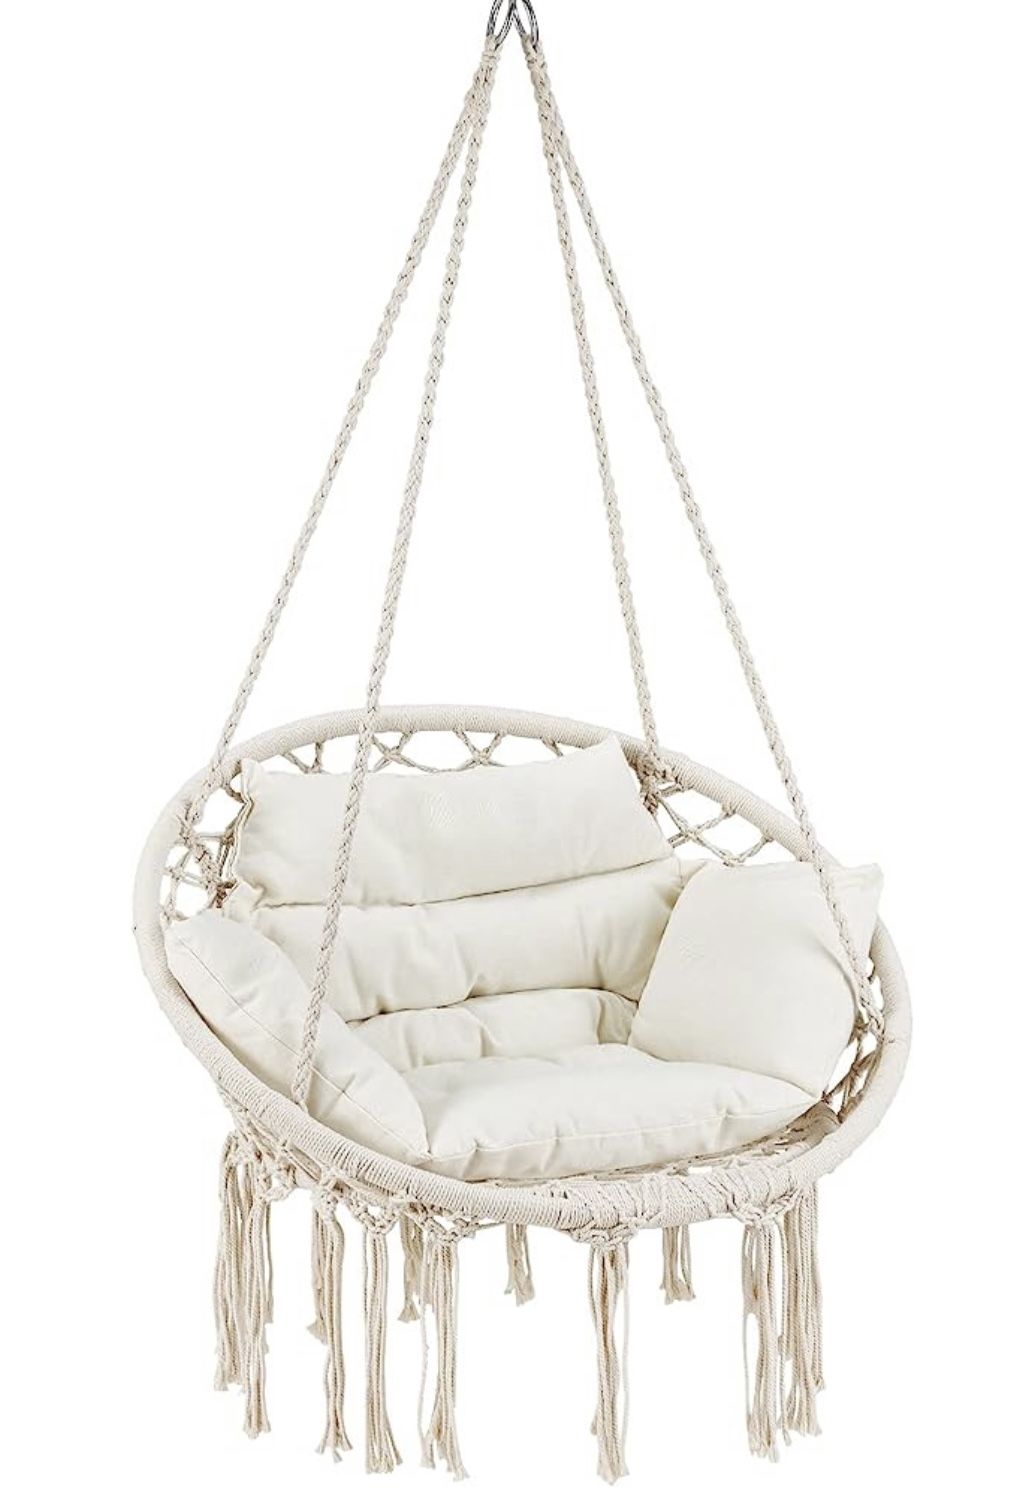 Hammock Swing Chair with Cushion and Hardware Kits, Handwoven Cotton Rope Macrame Hanging Swing Chair for Indoor, Outdoor, Patio, Bedr